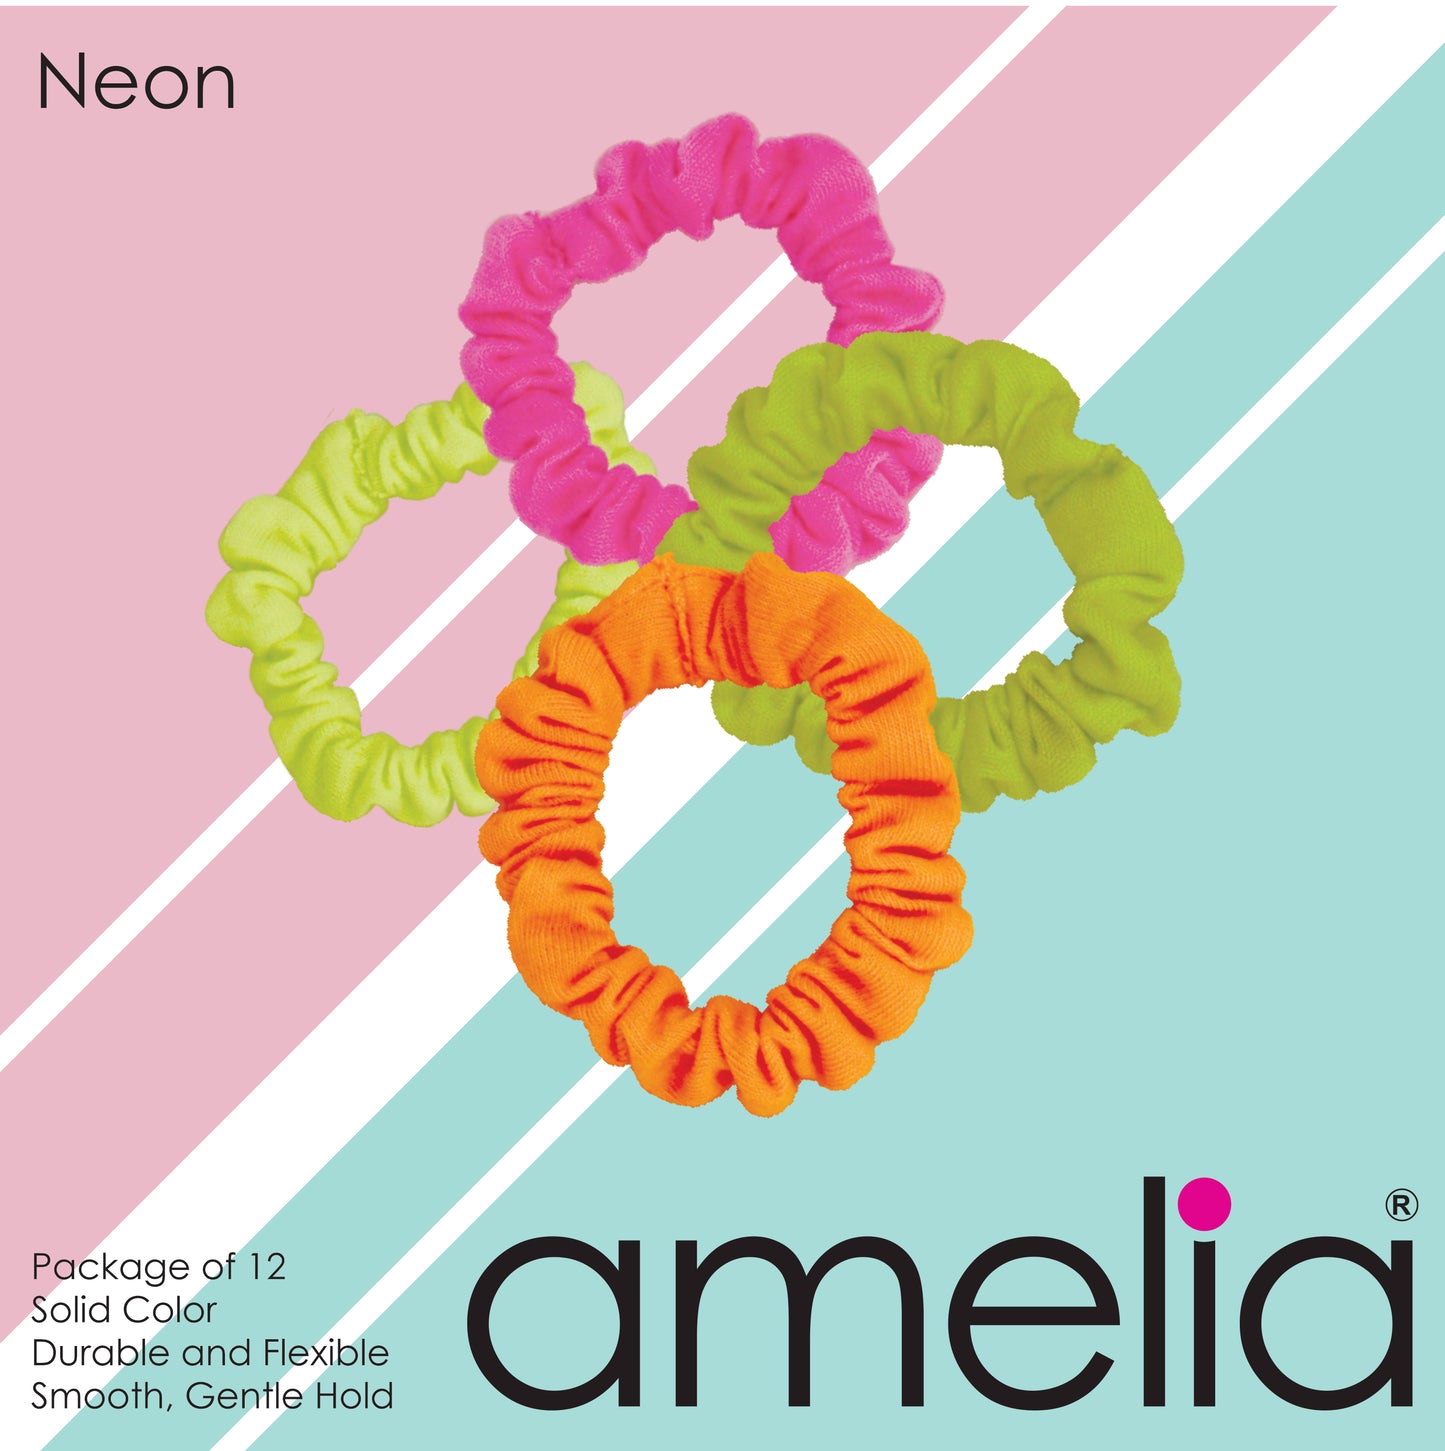 Amelia Beauty, Neon Mix Jersey Scrunchies, 2.25in Diameter, Gentle on Hair, Strong Hold, No Snag, No Dents or Creases. 12 Pack